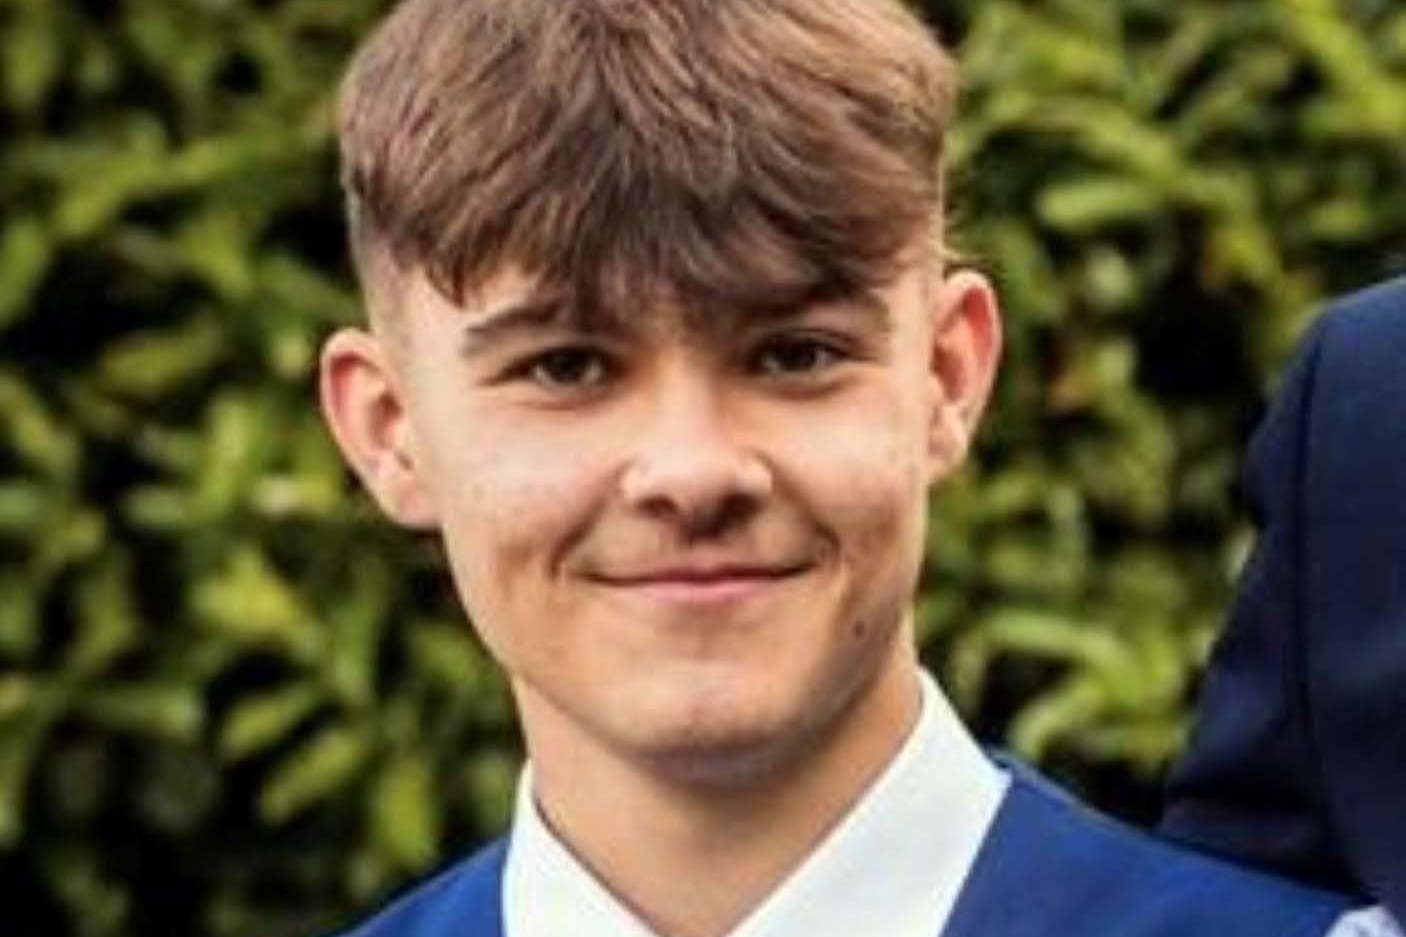 Charlie Cosser, 17, who died after being stabbed in Warnham, West Sussex, in the early hours of July 23 (Family handout/Sussex Police/PA)